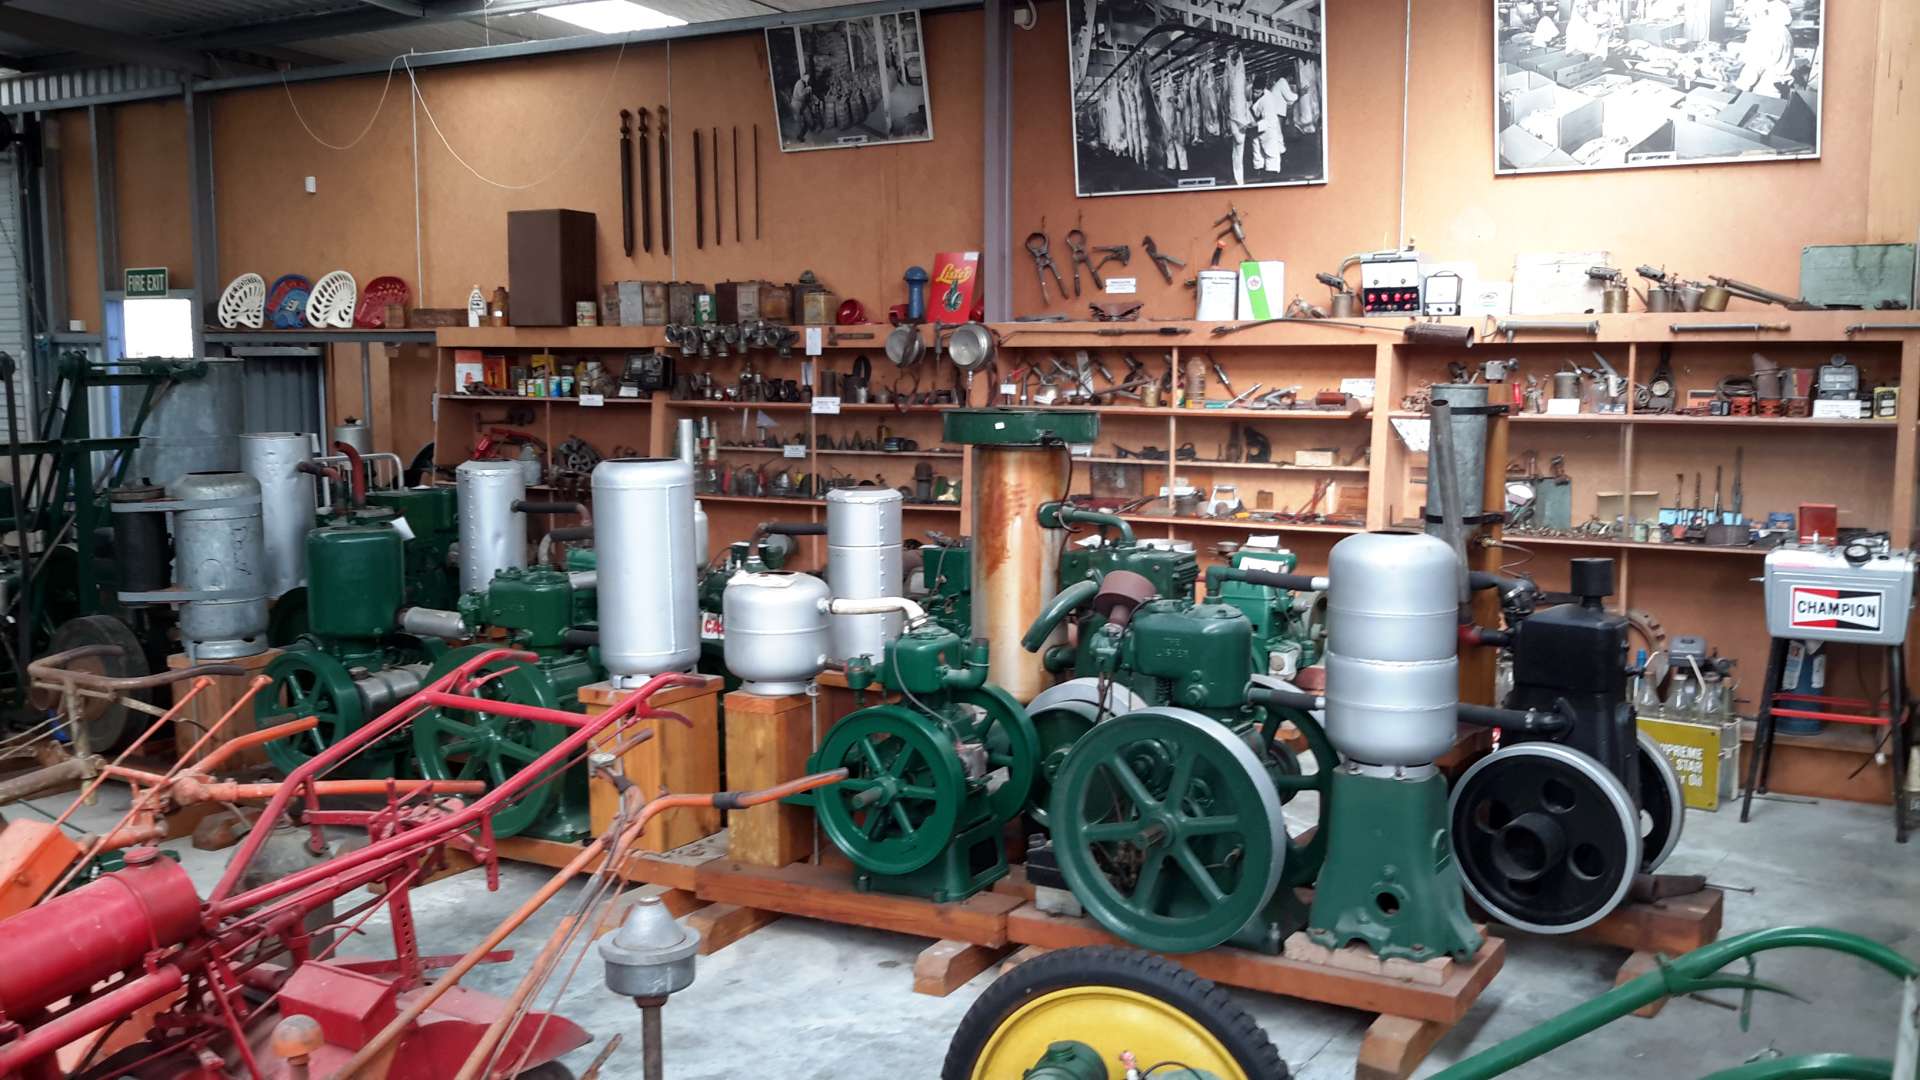 Matthews Vintage Collection in Northland has a amazing collection of NZ historical equipment